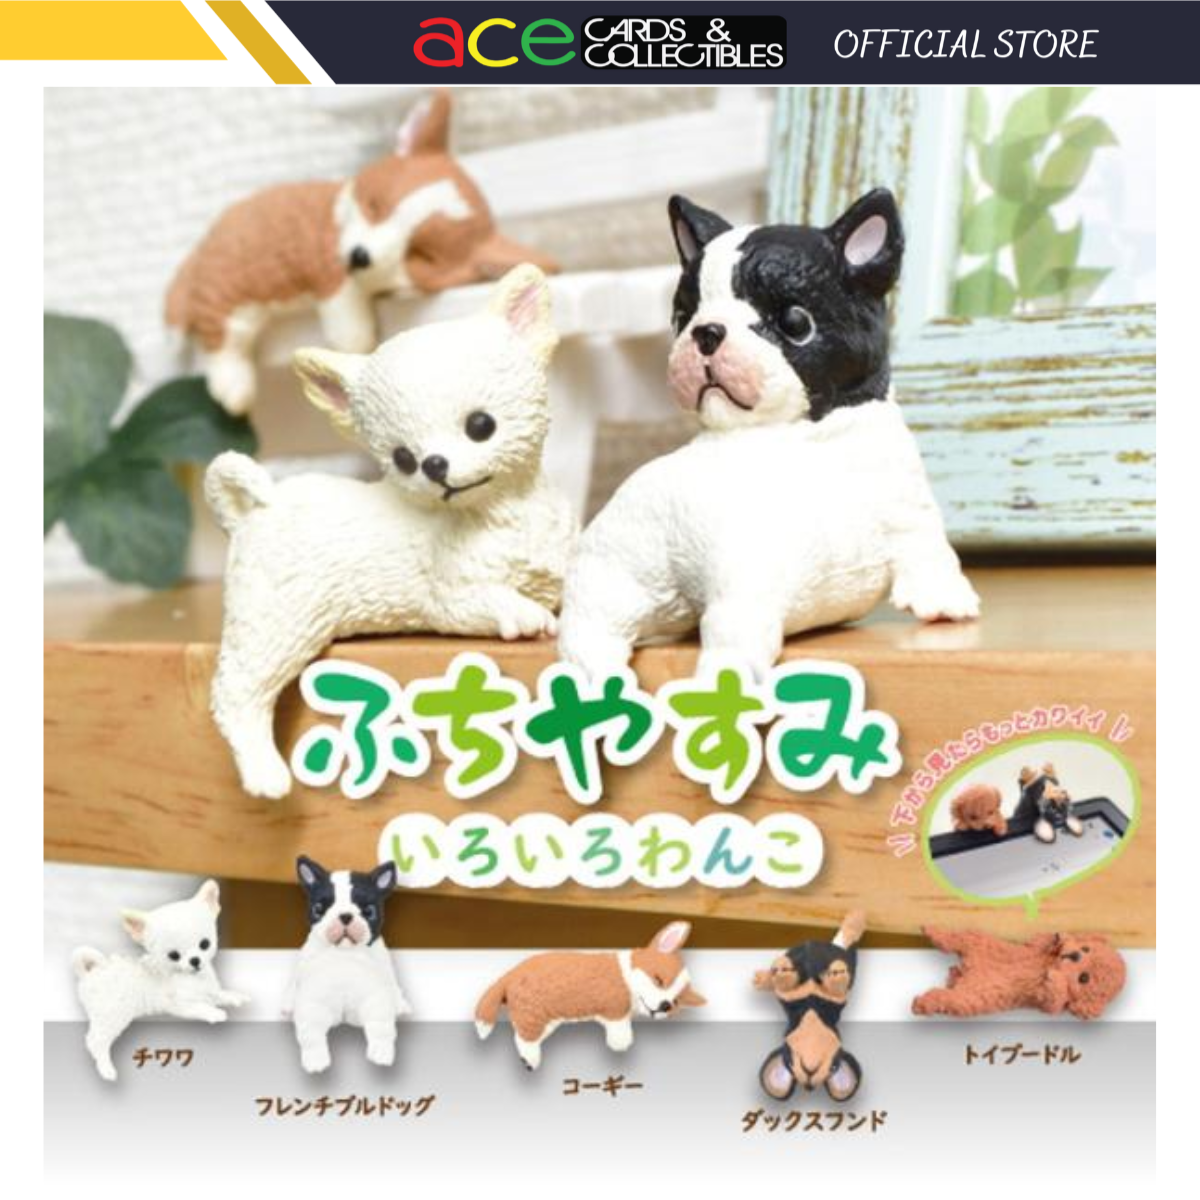 Yell x Edge Rest Dog Series-Display Box (10 pcs)-Yell-Ace Cards & Collectibles